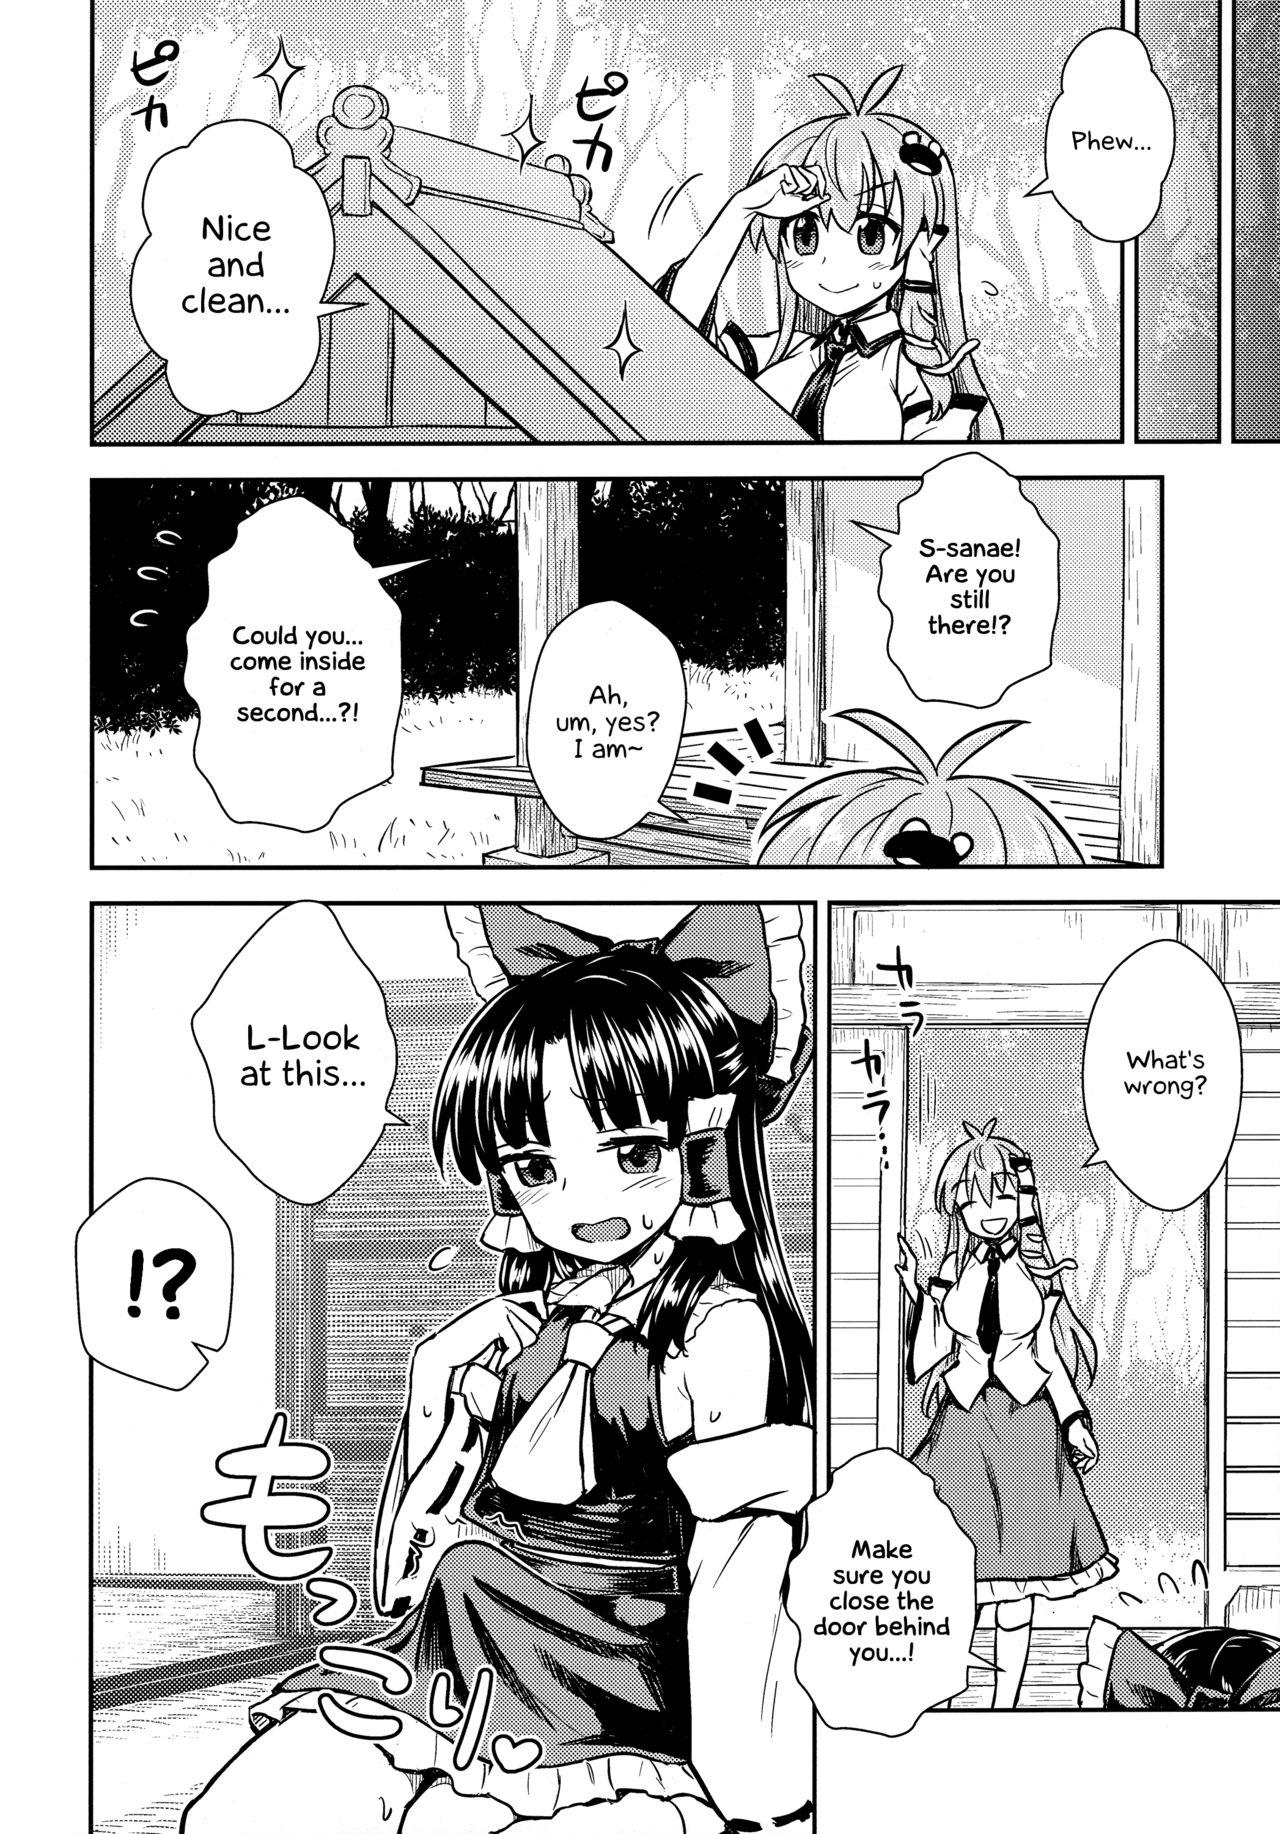 Step Brother Sanae-san no Oharai Daisakusen - Touhou project Cunt - Page 3